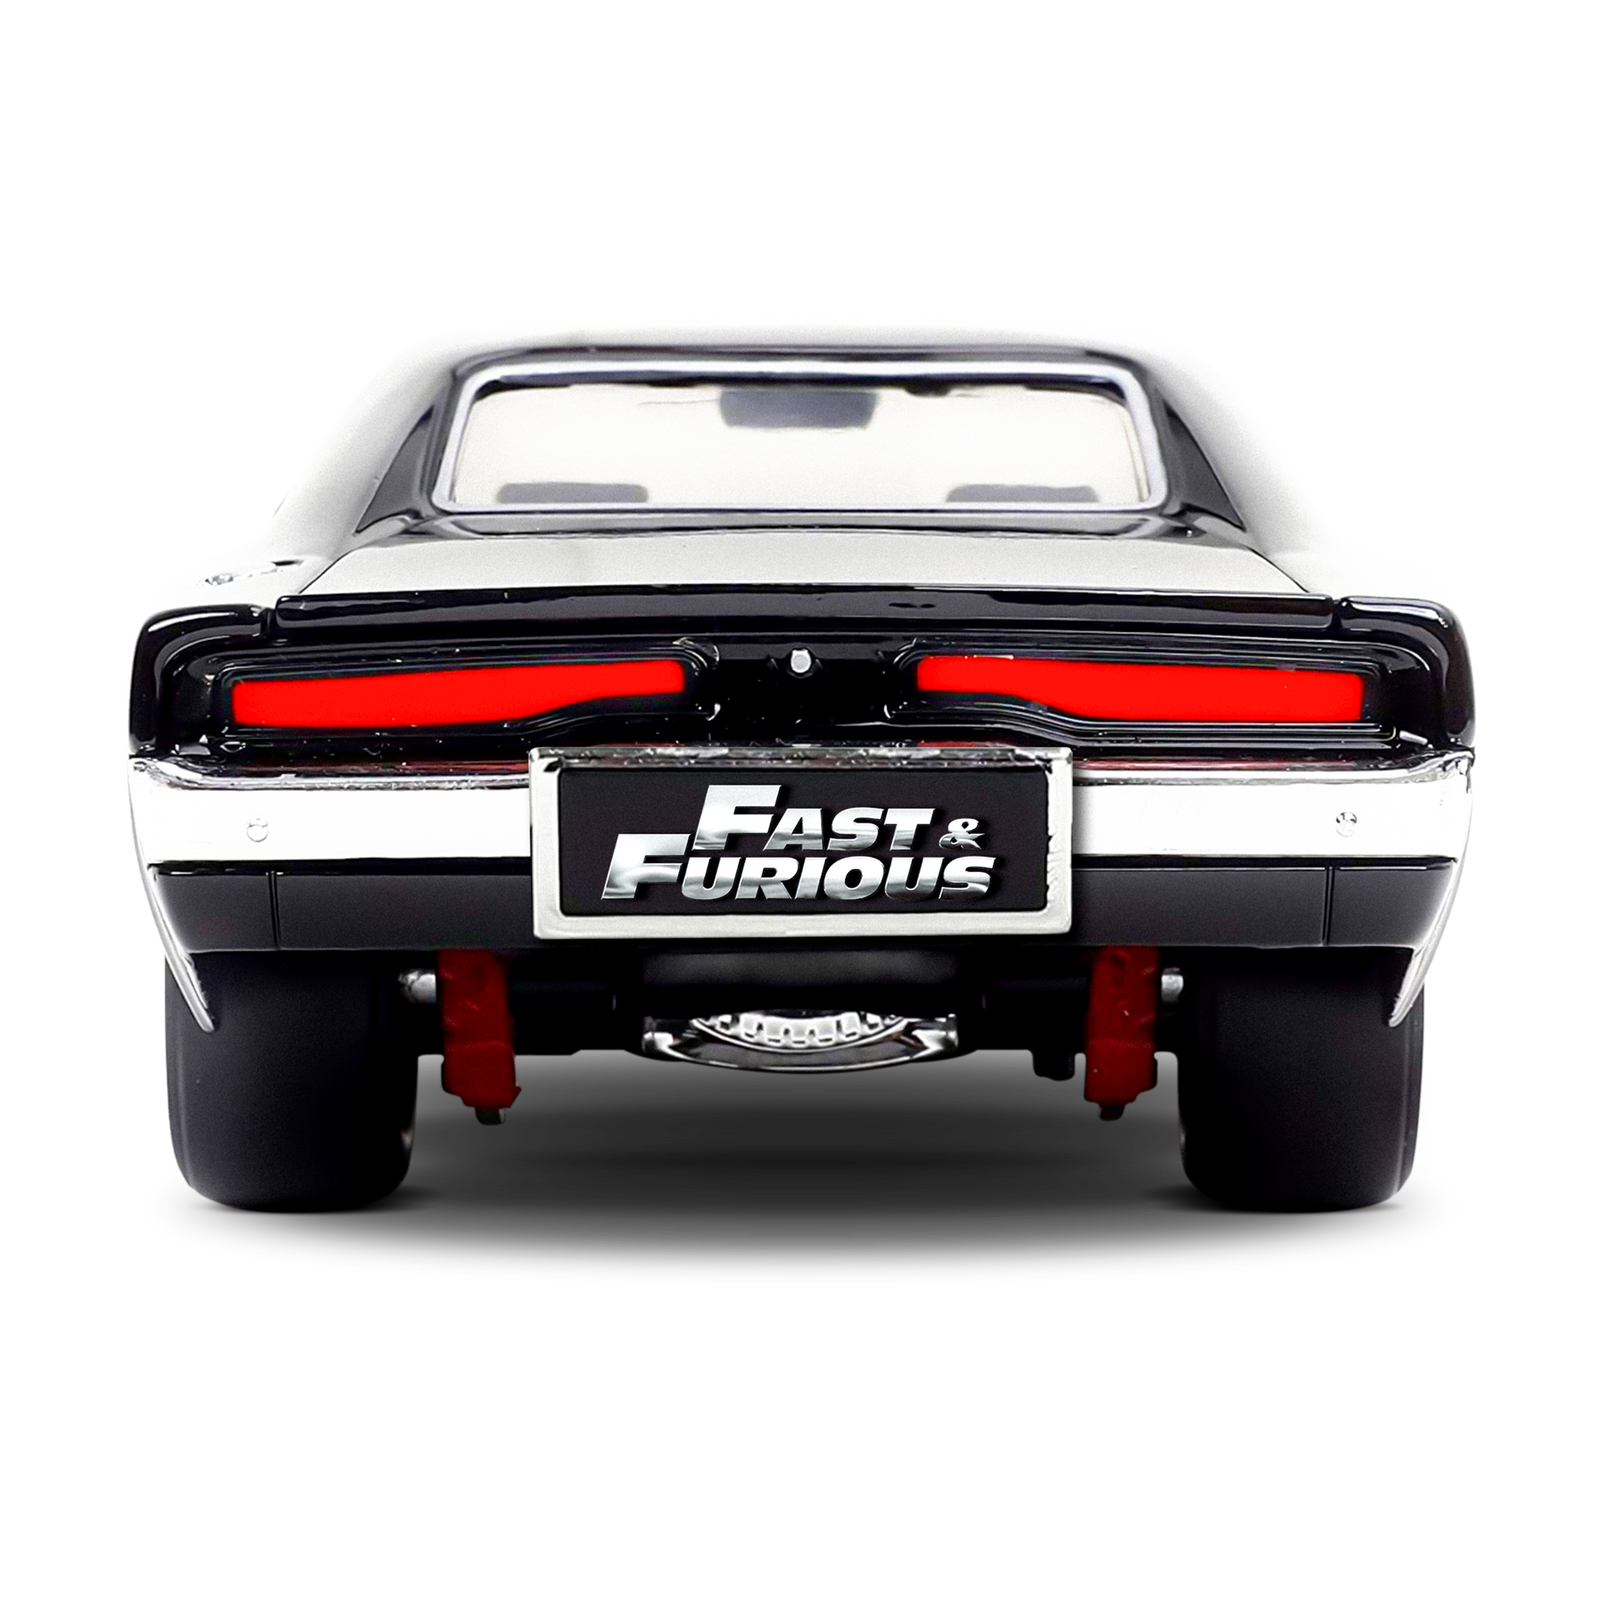 Fast and Furious logo.